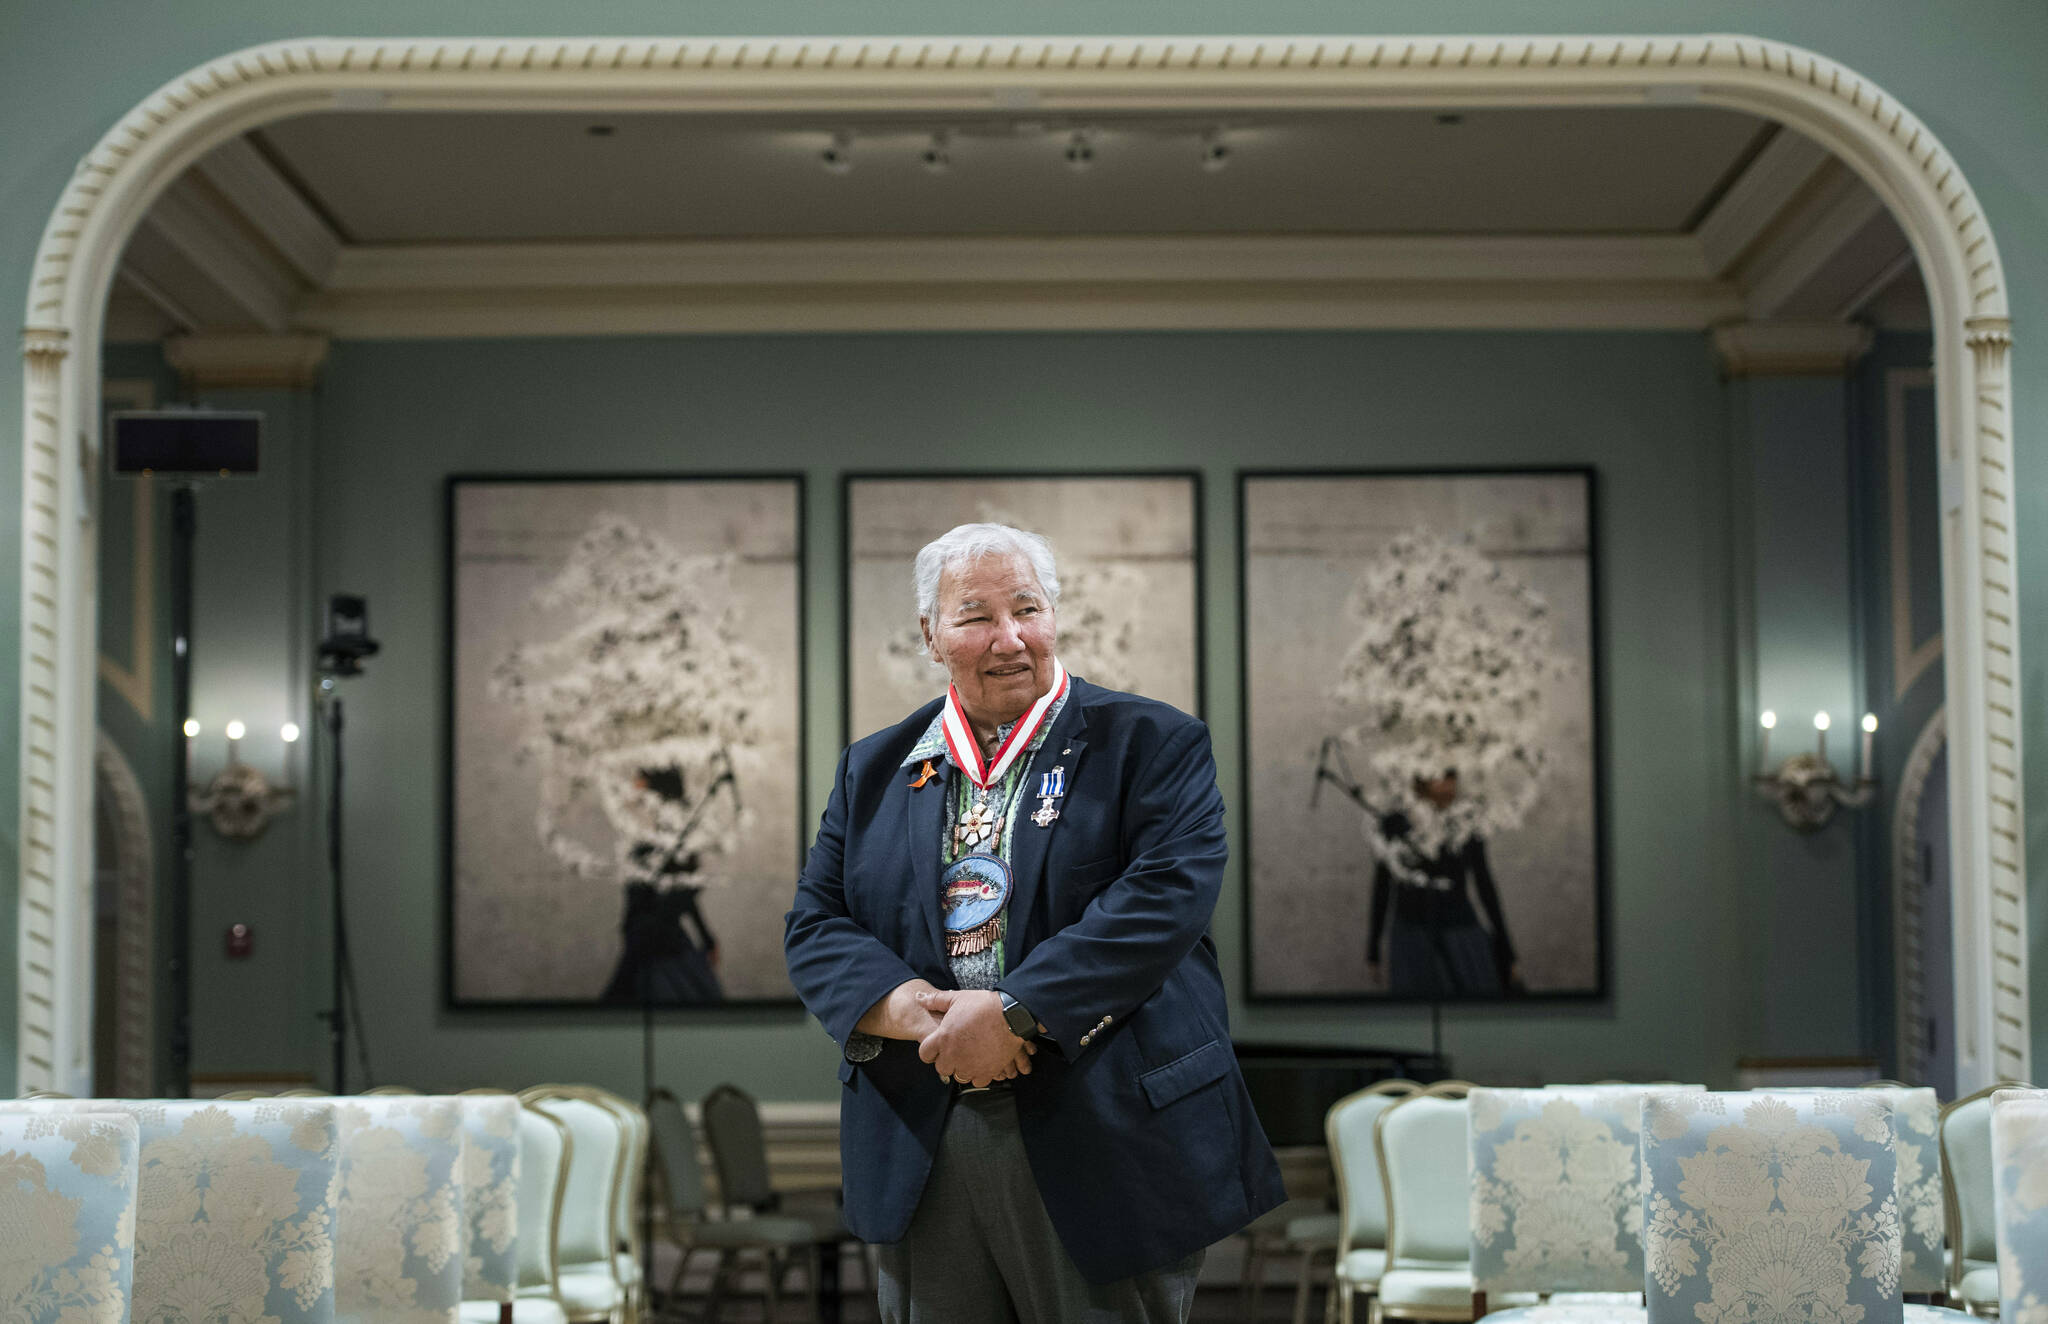 Justice Murray Sinclair, who was Manitoba’s first Indigenous judge, led the Truth and Reconciliation Commission and served as a senator, stands in the ballroom at Rideau Hall after being invested as a companion of the Order of Canada and receiving a Meritorious Service Decoration (Civil Division), in Ottawa, on Thursday, May 26, 2022. THE CANADIAN PRESS/Justin Tang